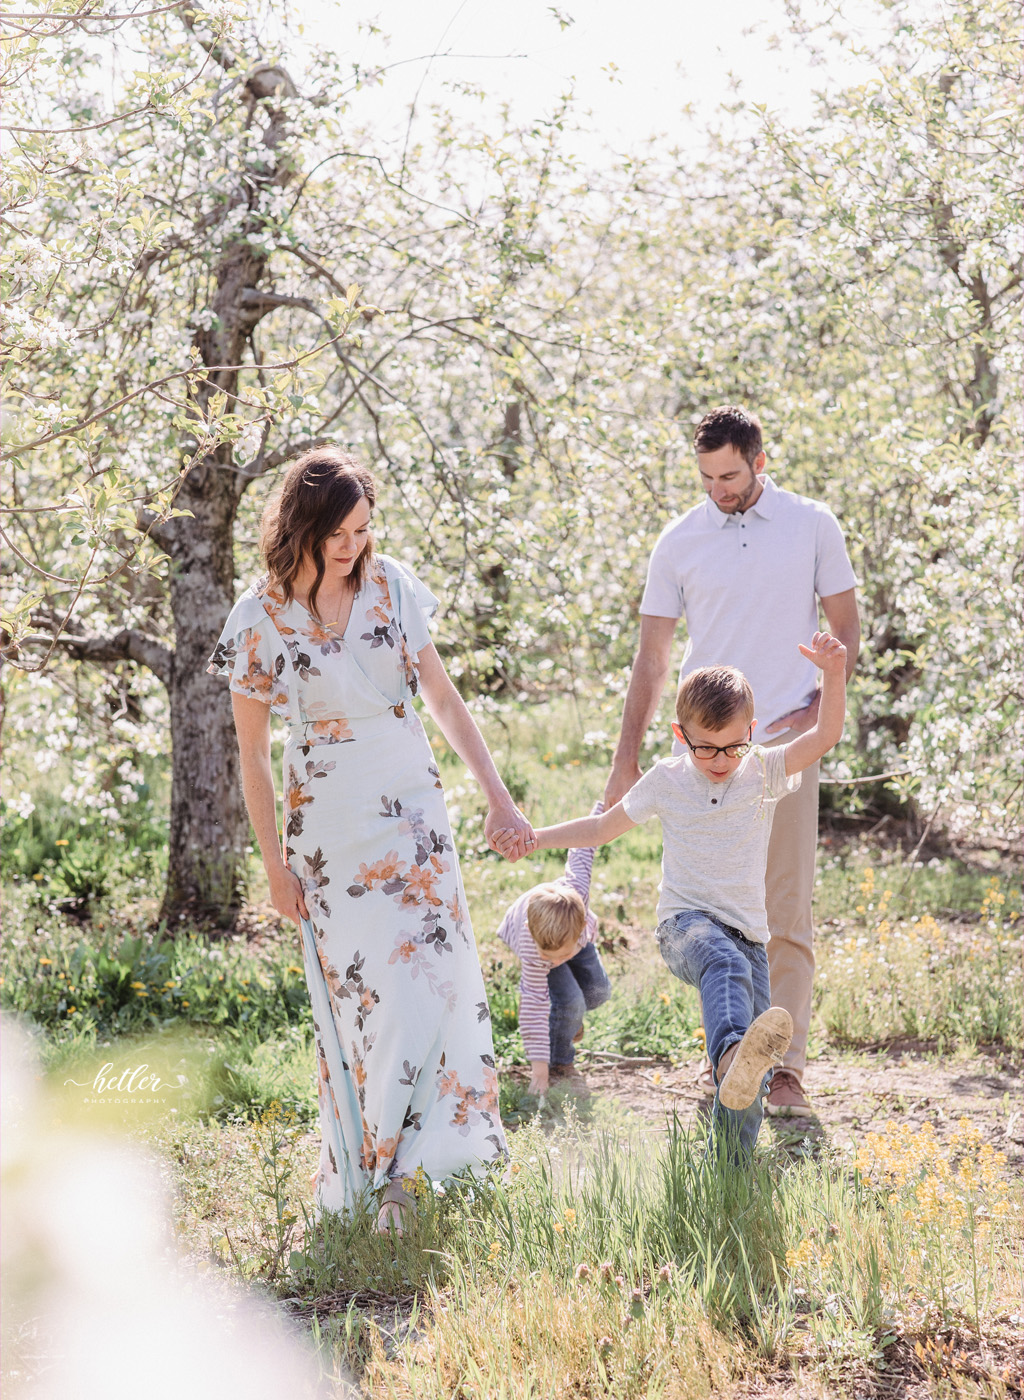 Spring family photo session at the apple orchard full of blossoms in Sparta Michigan 